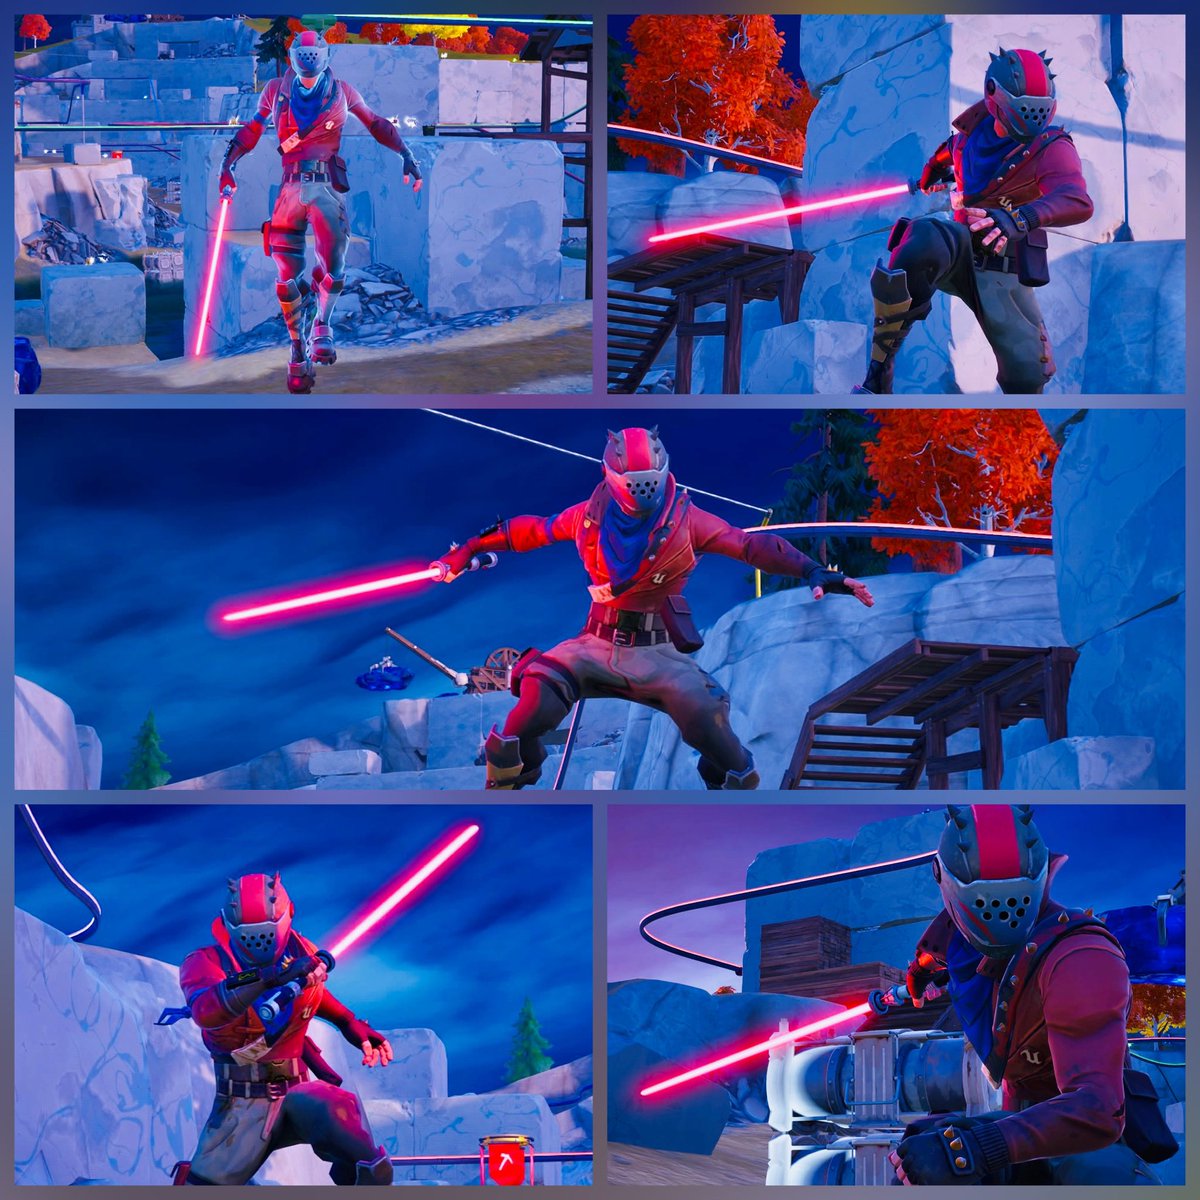 Is he a Sith?

#FortniteMEGA #Fortography #Fortnite #FortniteArt #FortniteChapter4 #VirtualPhotography #FortniteChapter4Season2     #FortniteXStarWars #FortniteStarWars #StarWars #StarWarsDay #May4thBeWithYou #MayThe4thBeWithYou #FindtheForce